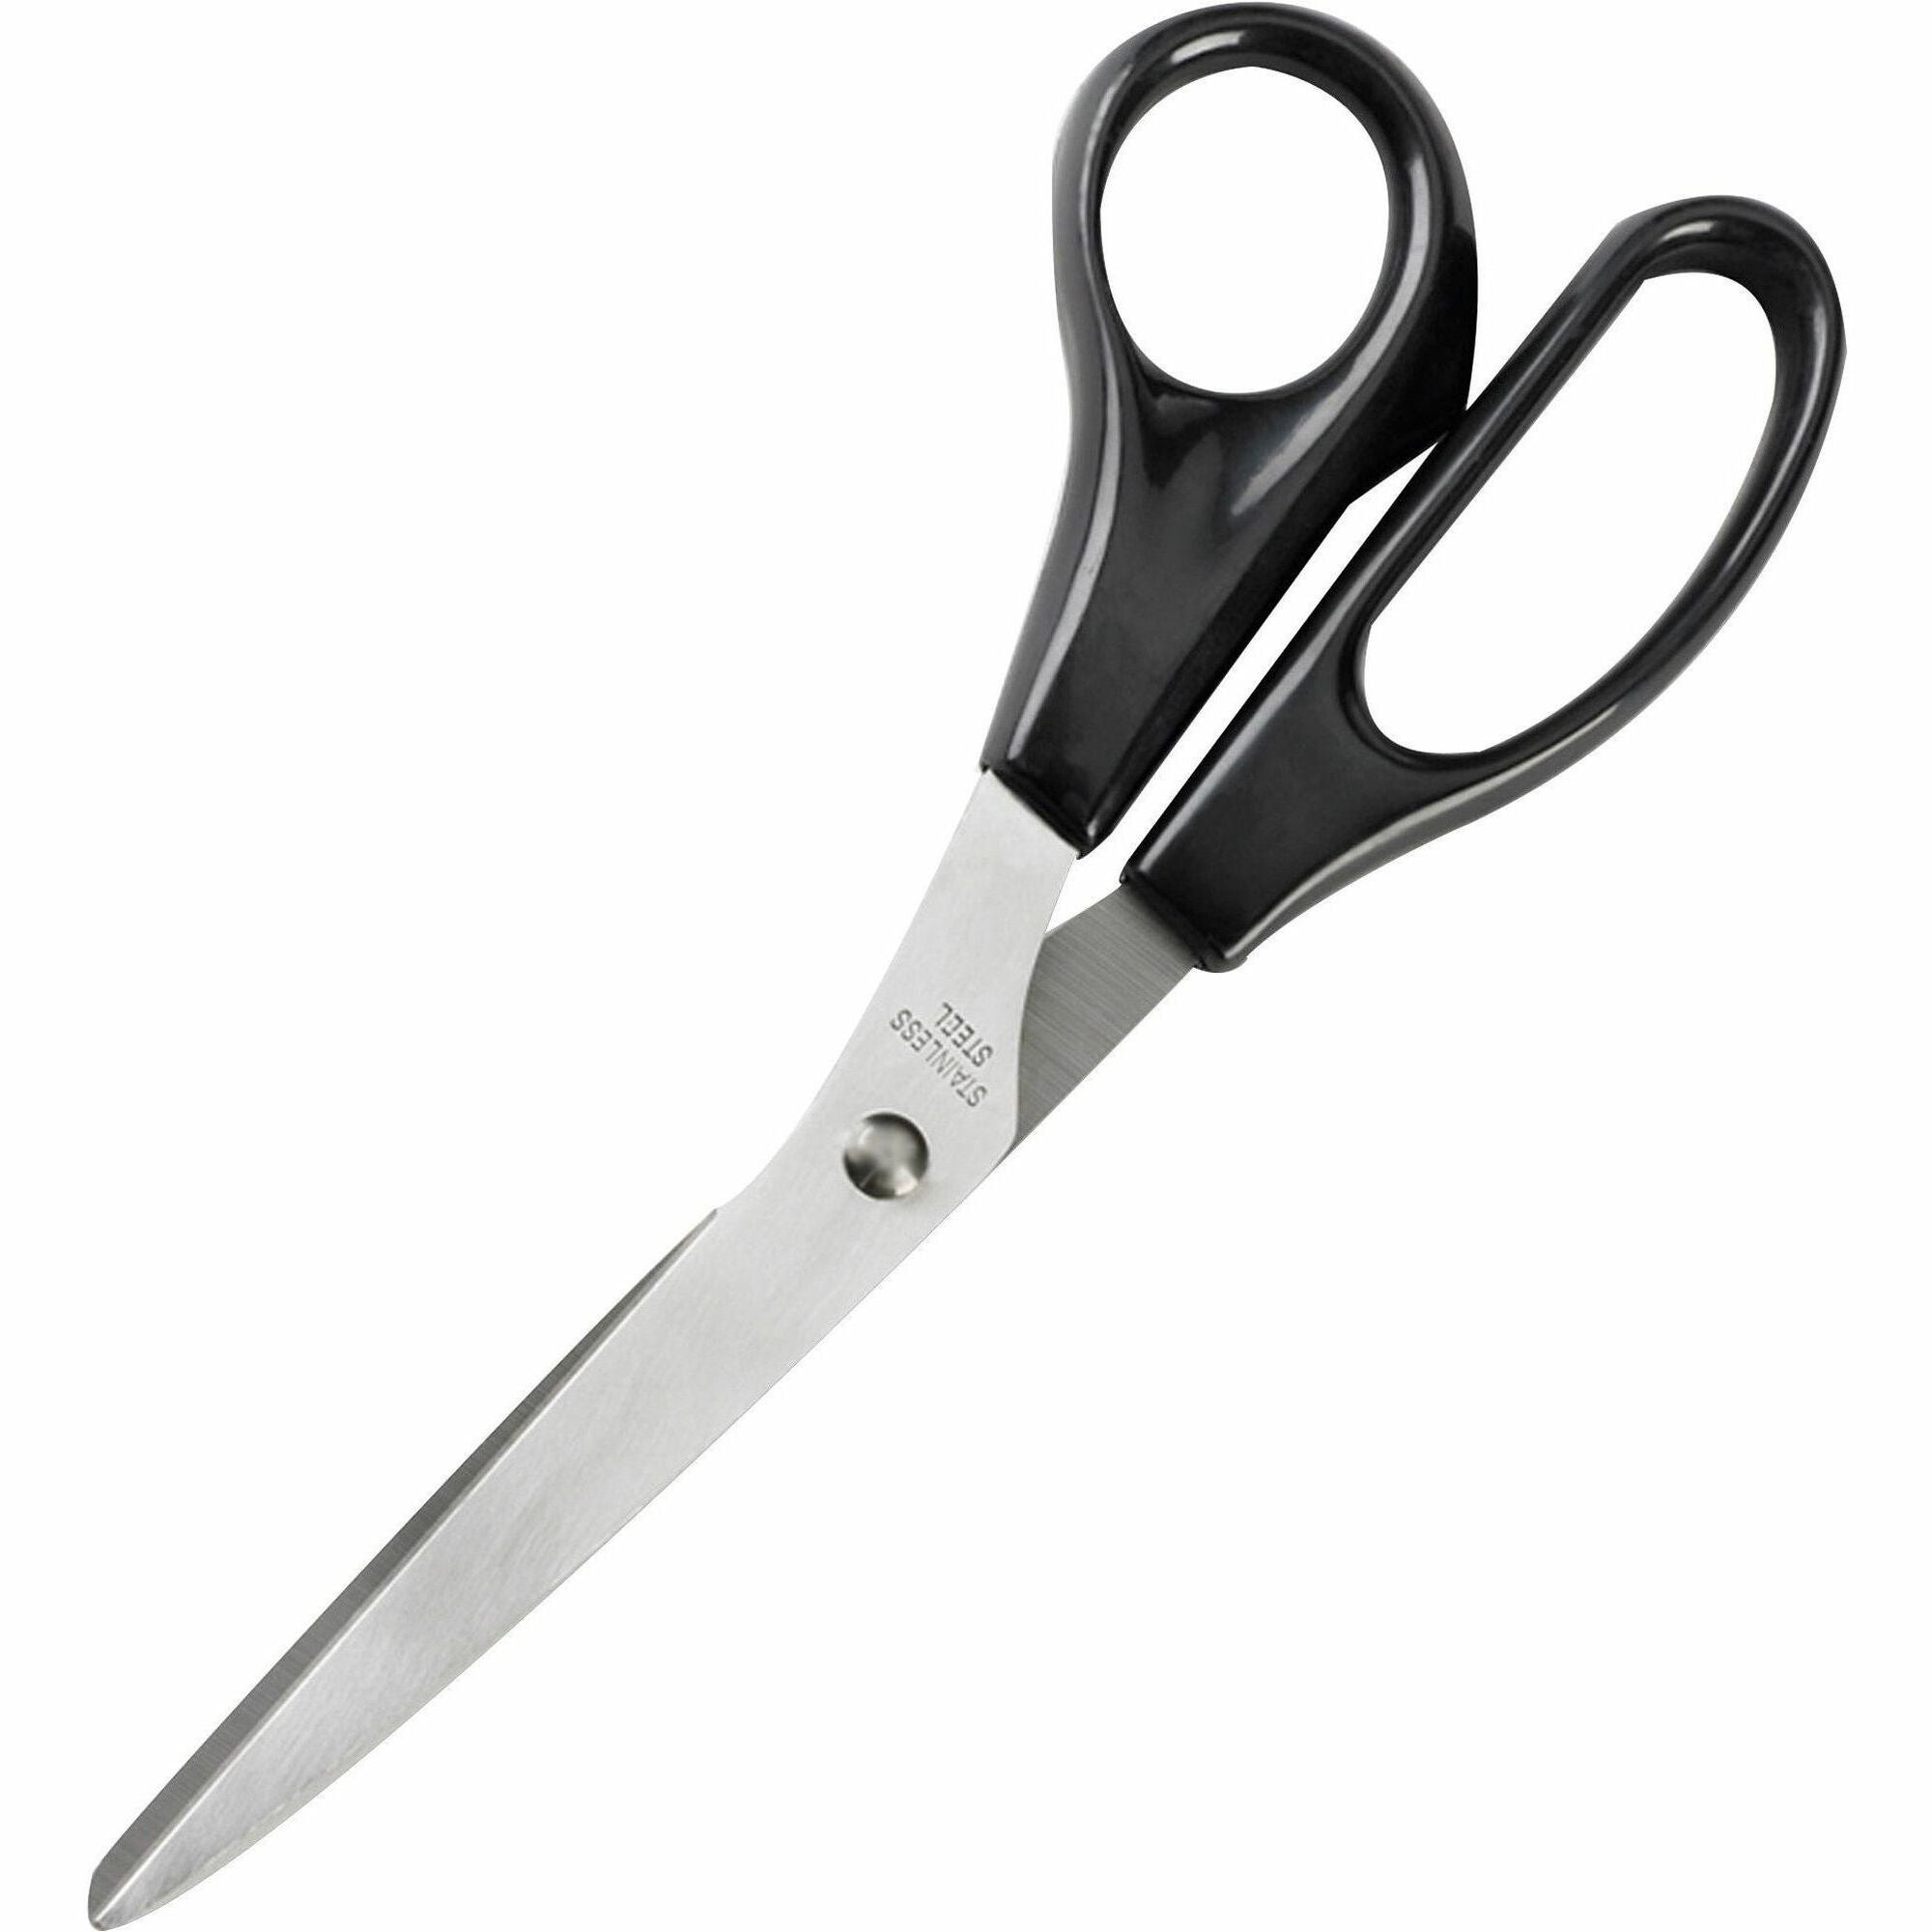 Business Source Stainless Steel Scissors - 8" Overall Length - Bent-right - Stainless Steel - Black - 1 Each - 